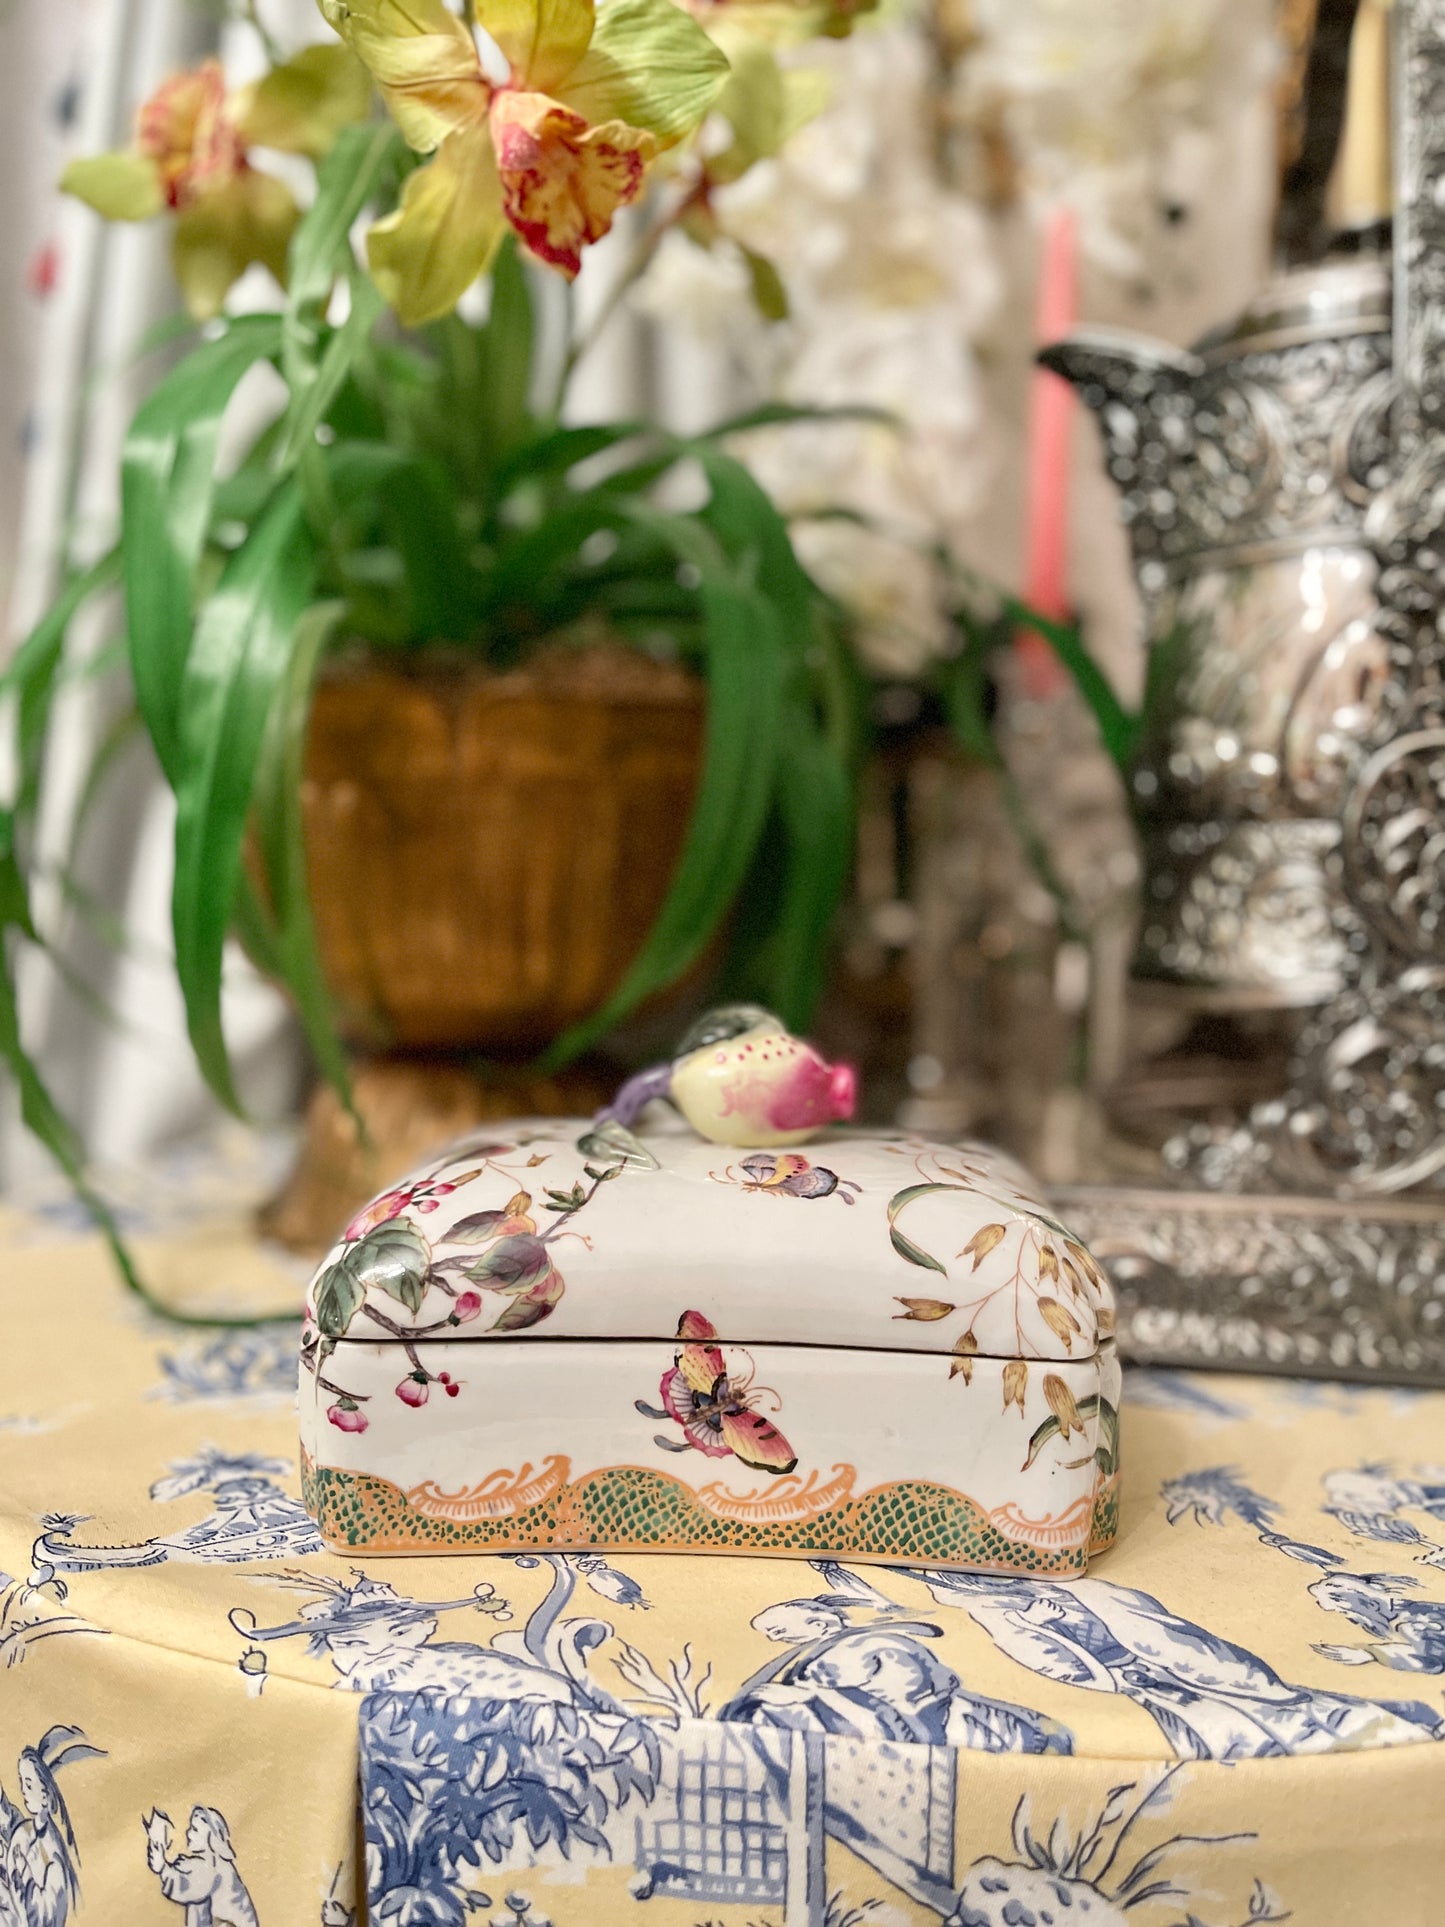 Butterflies and Botanicals Chinoiserie Porcelain Lidded Box with Applied Fruit Finial, Marked, Vintage